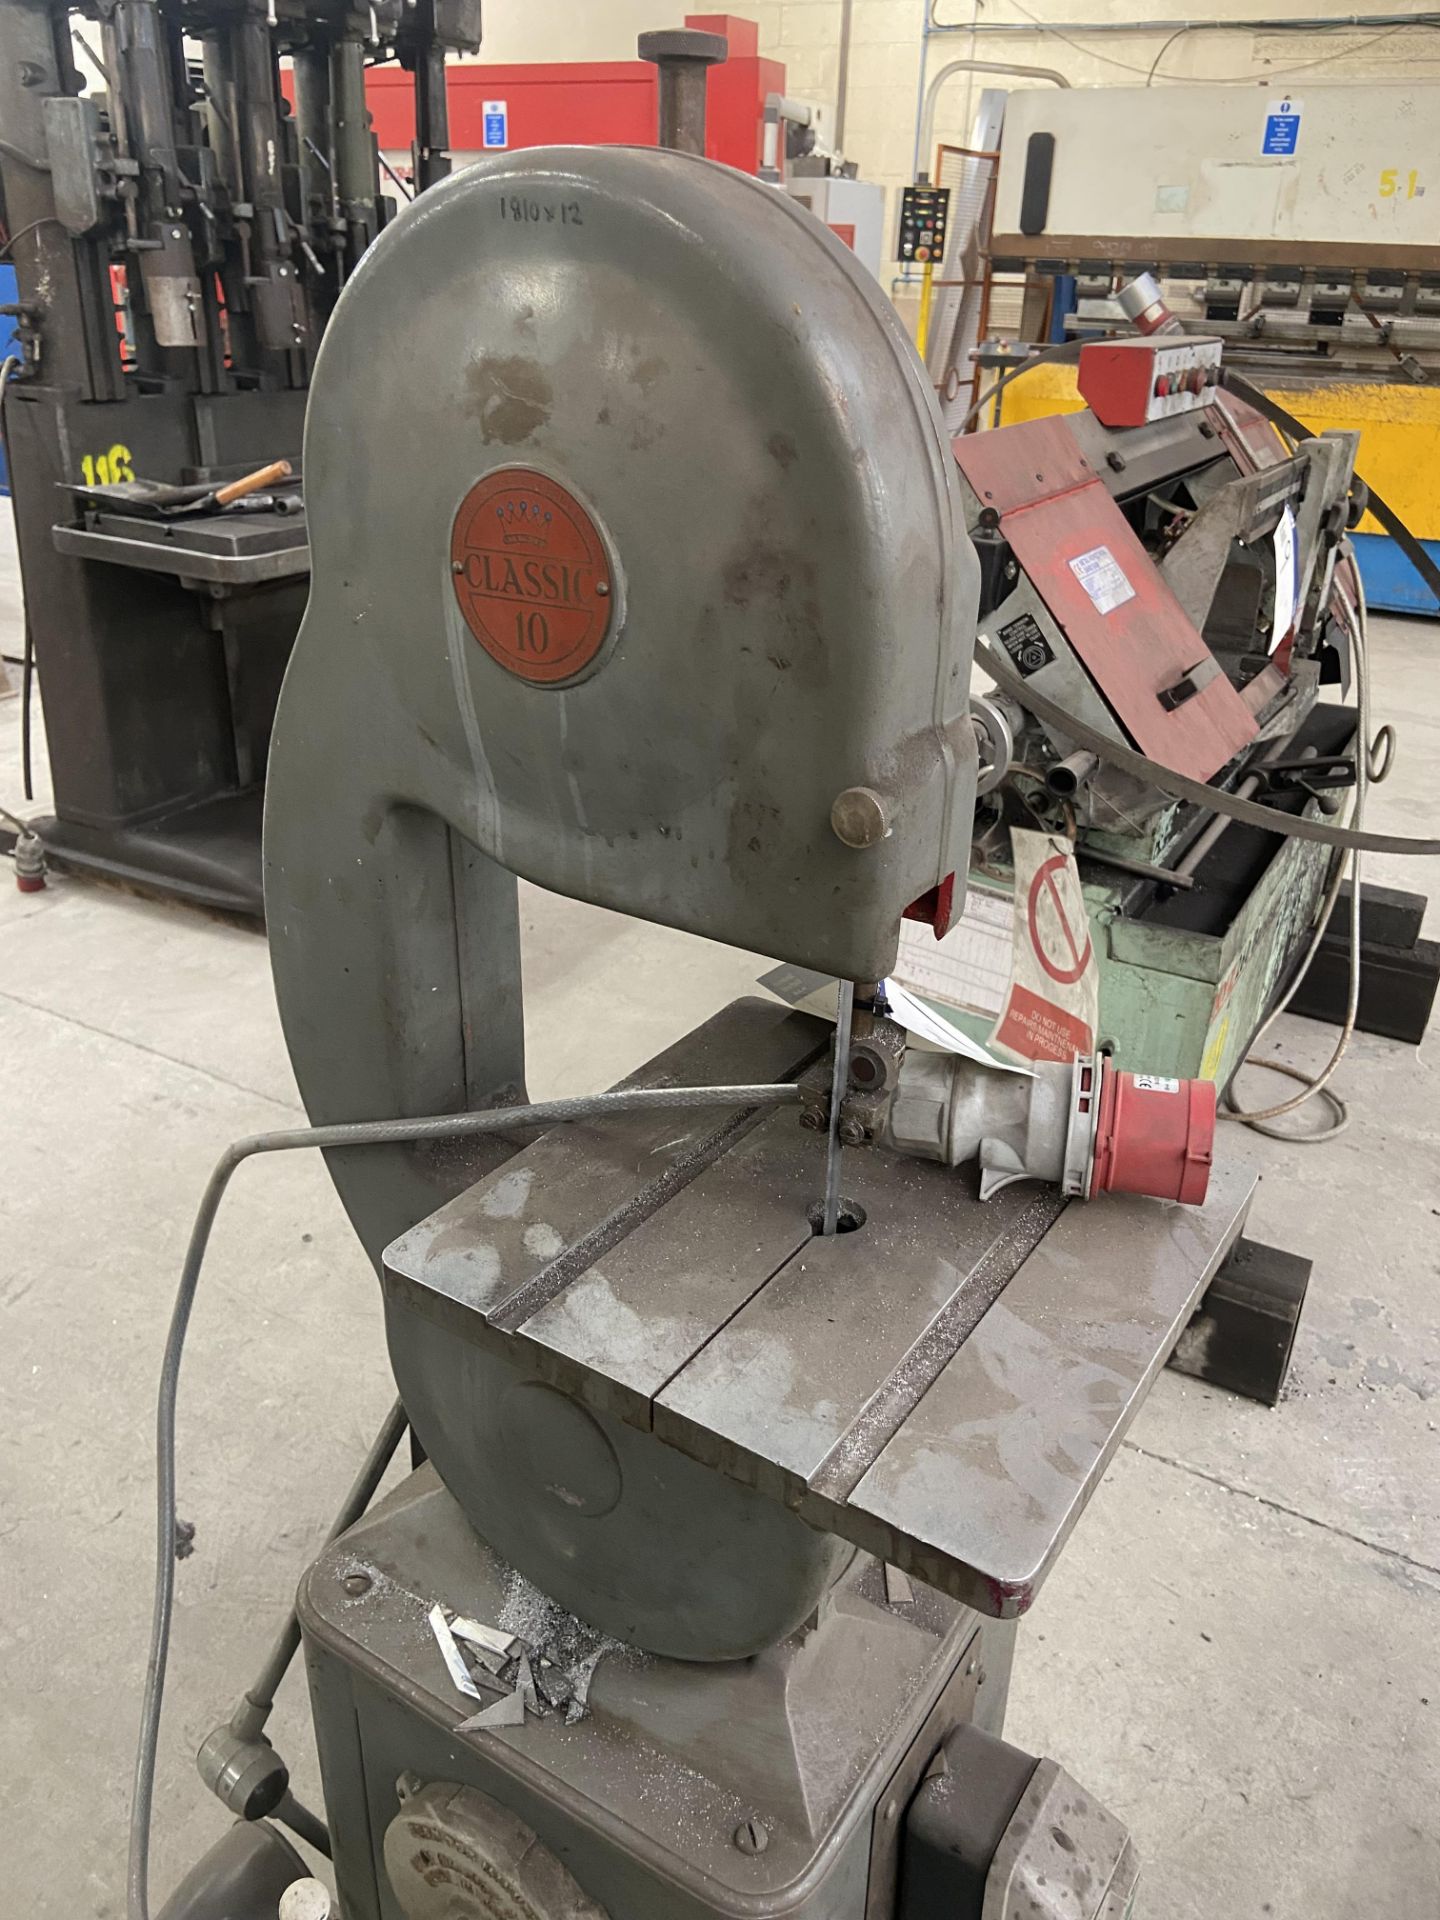 Coronet approx. 240mm deep-in-throat Classic 10 Vertical Bandsaw, with stand Please read the - Image 2 of 2